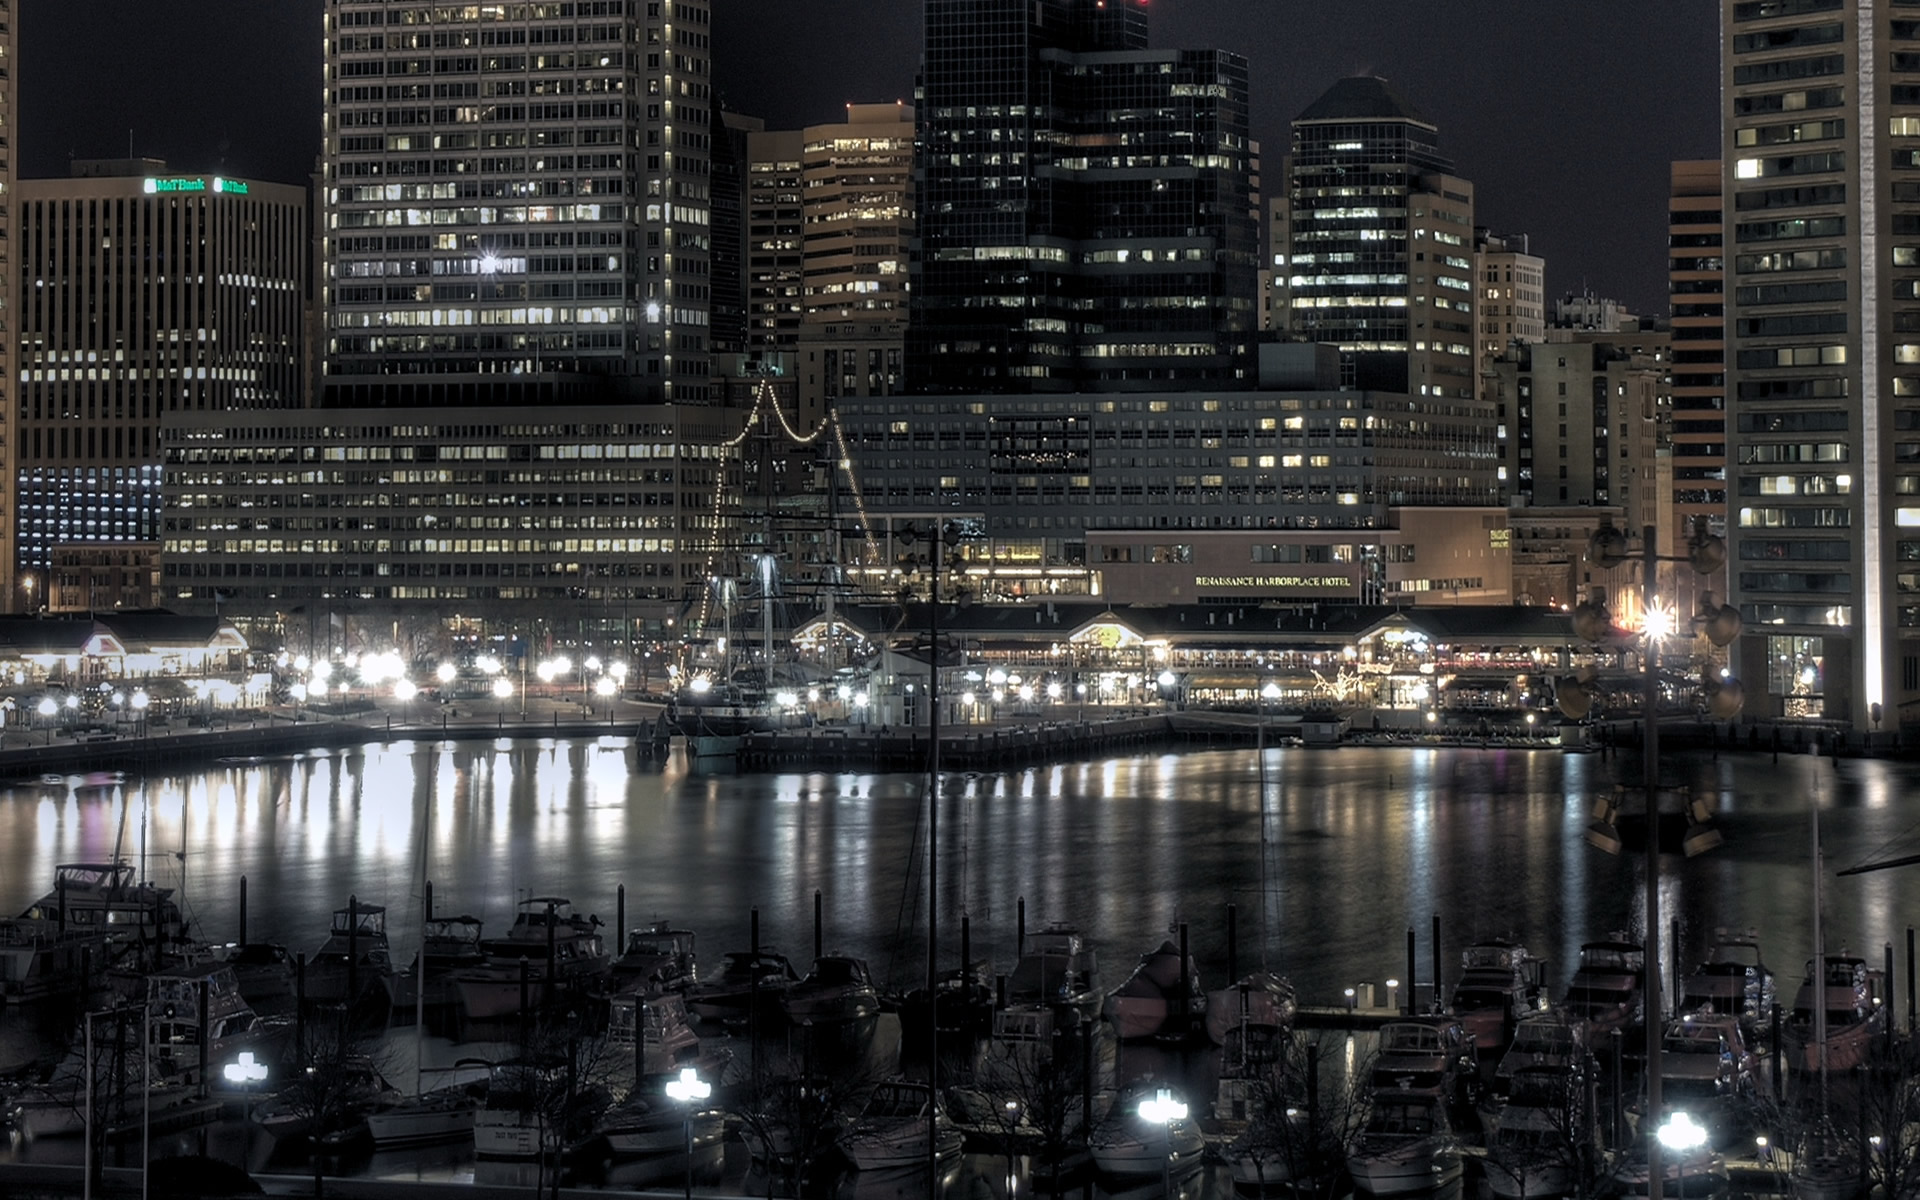 baltimore, man made, boat, city, light, river, cities